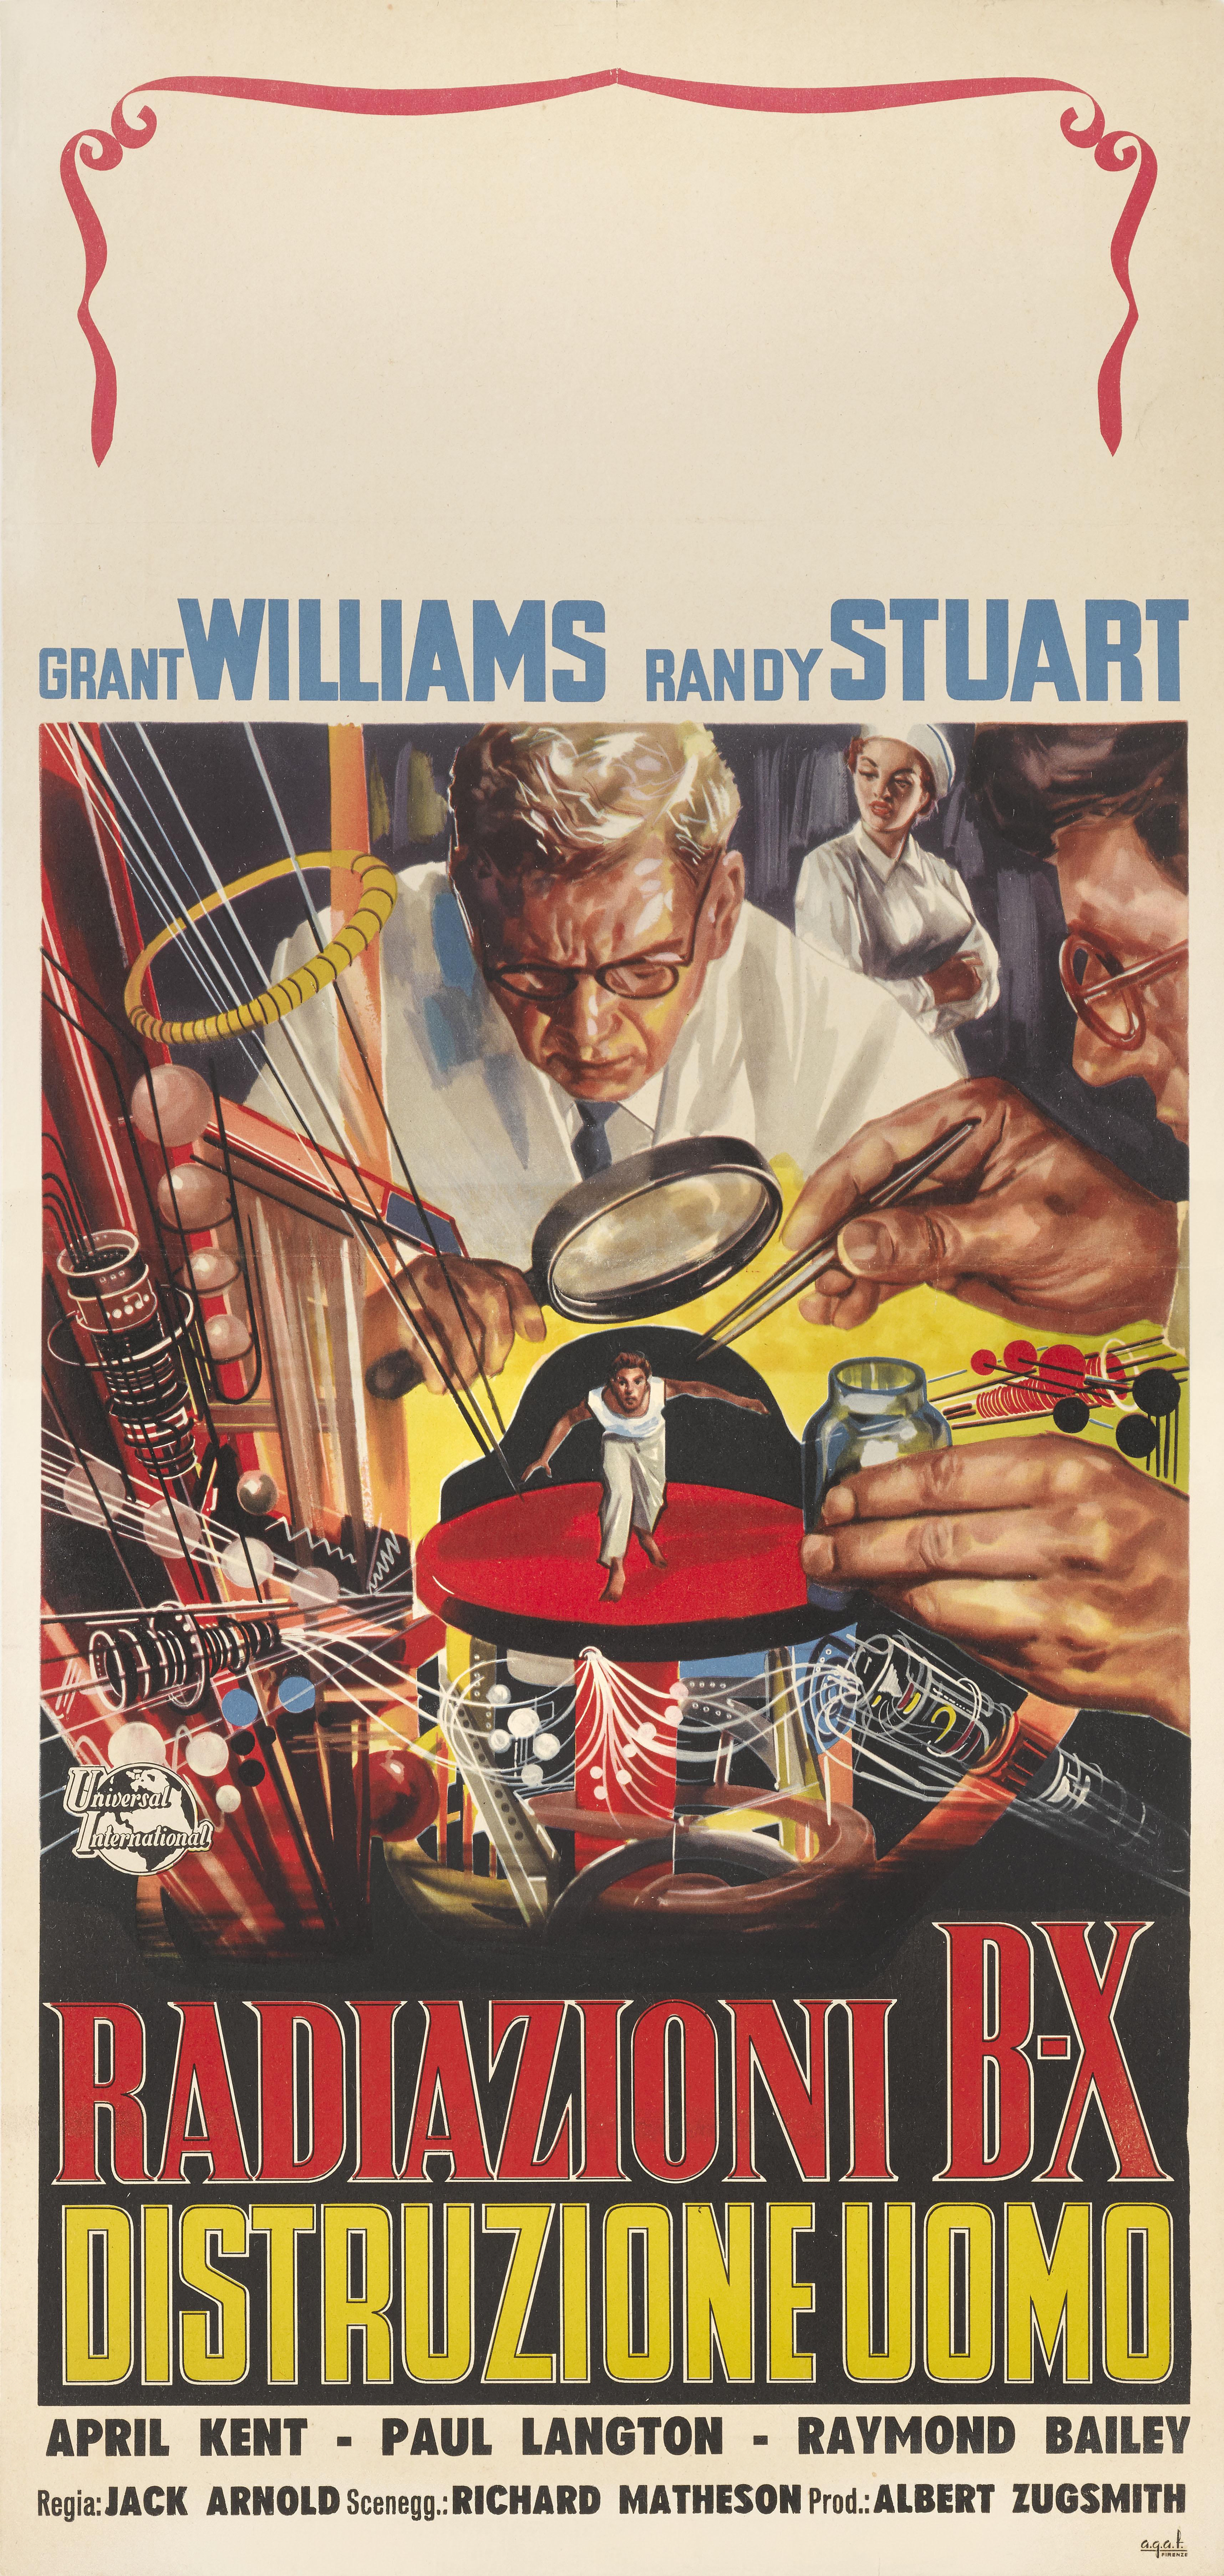 Original Italian film poster for the 1957 Science fiction film The Incredible Shrinking Man.
This poster would have been used outside the cinema in a display case at the time of the films release. This film starred Grant Williams, Randy Stuart,